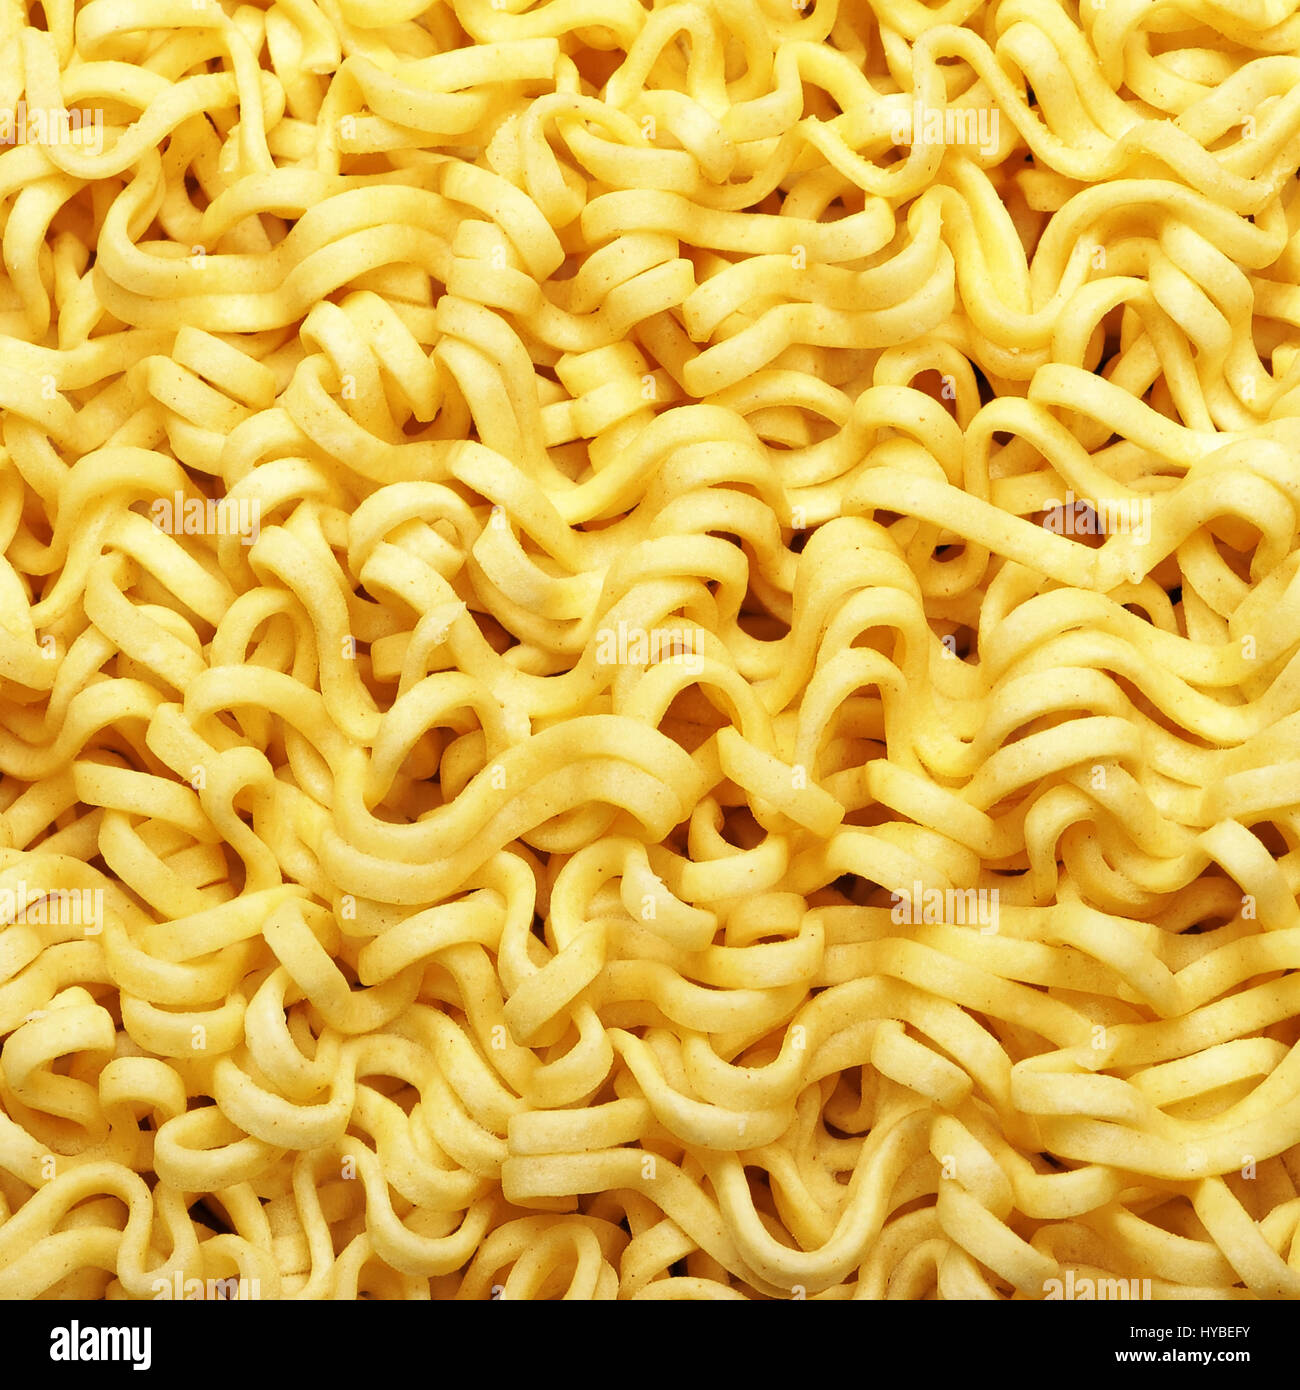 Texture of yellow instant noodles close up Stock Photo - Alamy